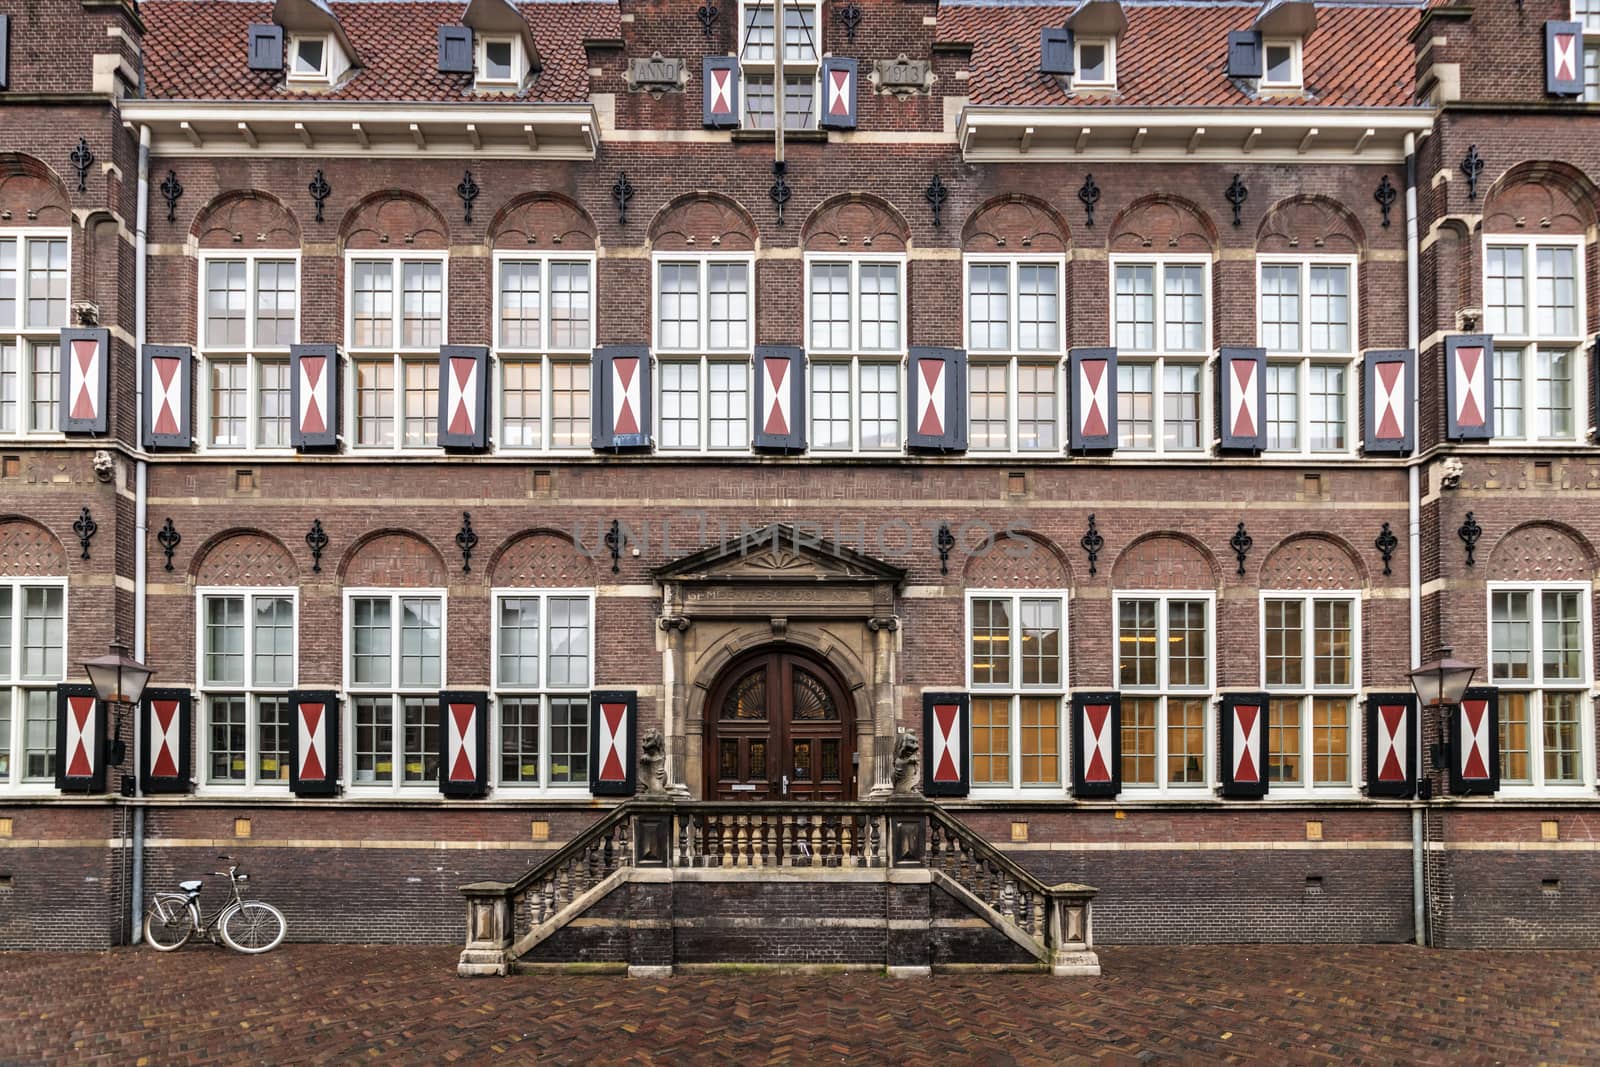 Flemish architecture school brick facade with a bicycle parking in front, Amsterdam, Netherlands